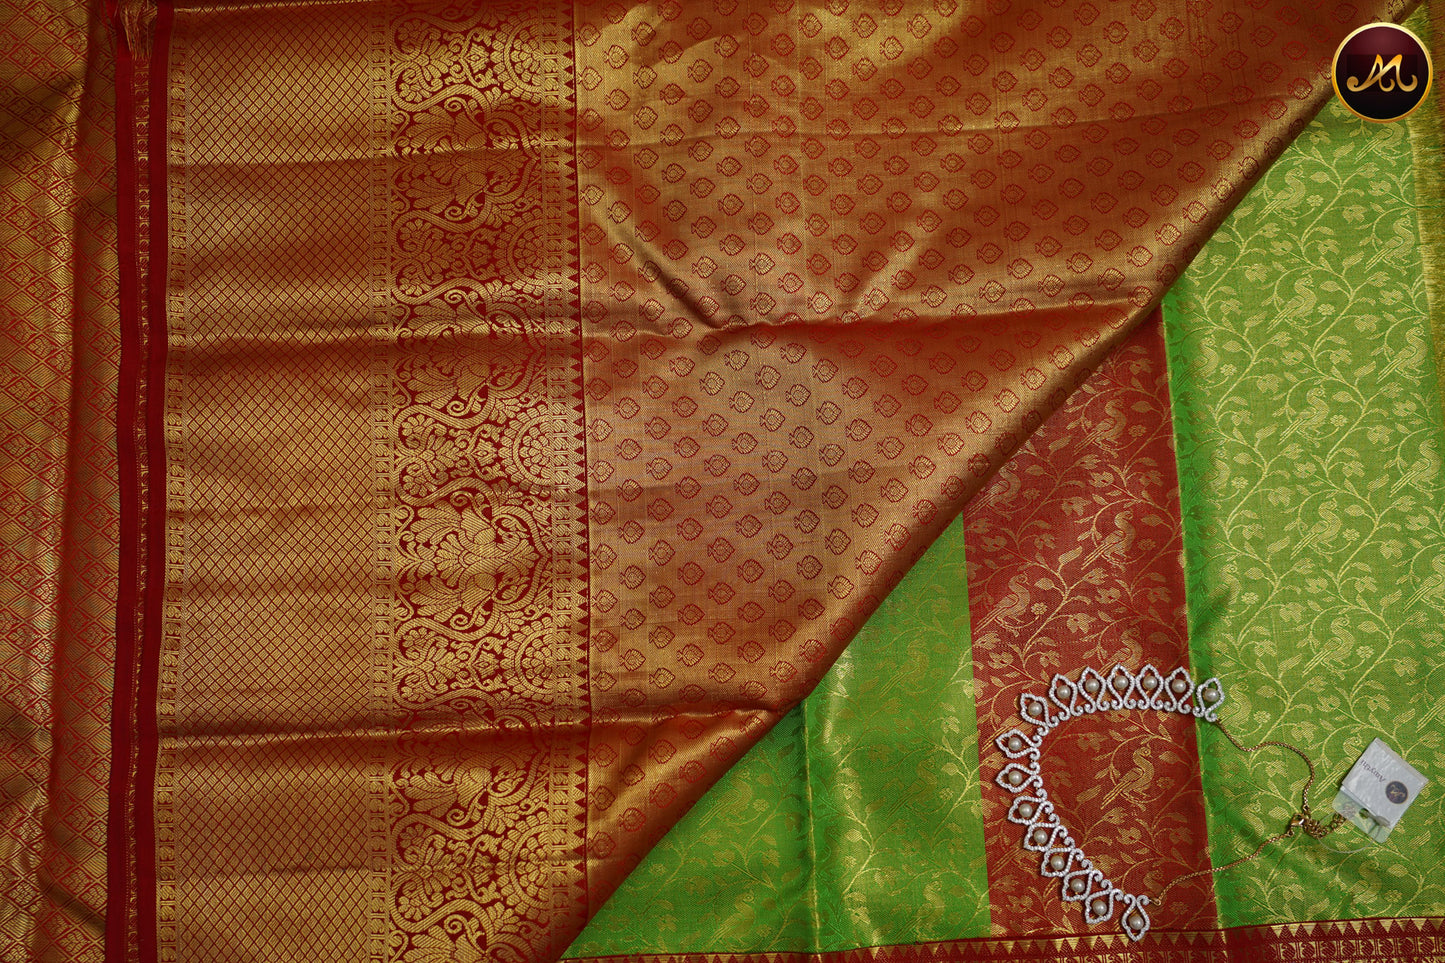 Kanchivaram Handloom Pure Silk in Tissue Emboss Pattern in Parrot green  And Red combination with Gold Zari  Border and Rich Pallu